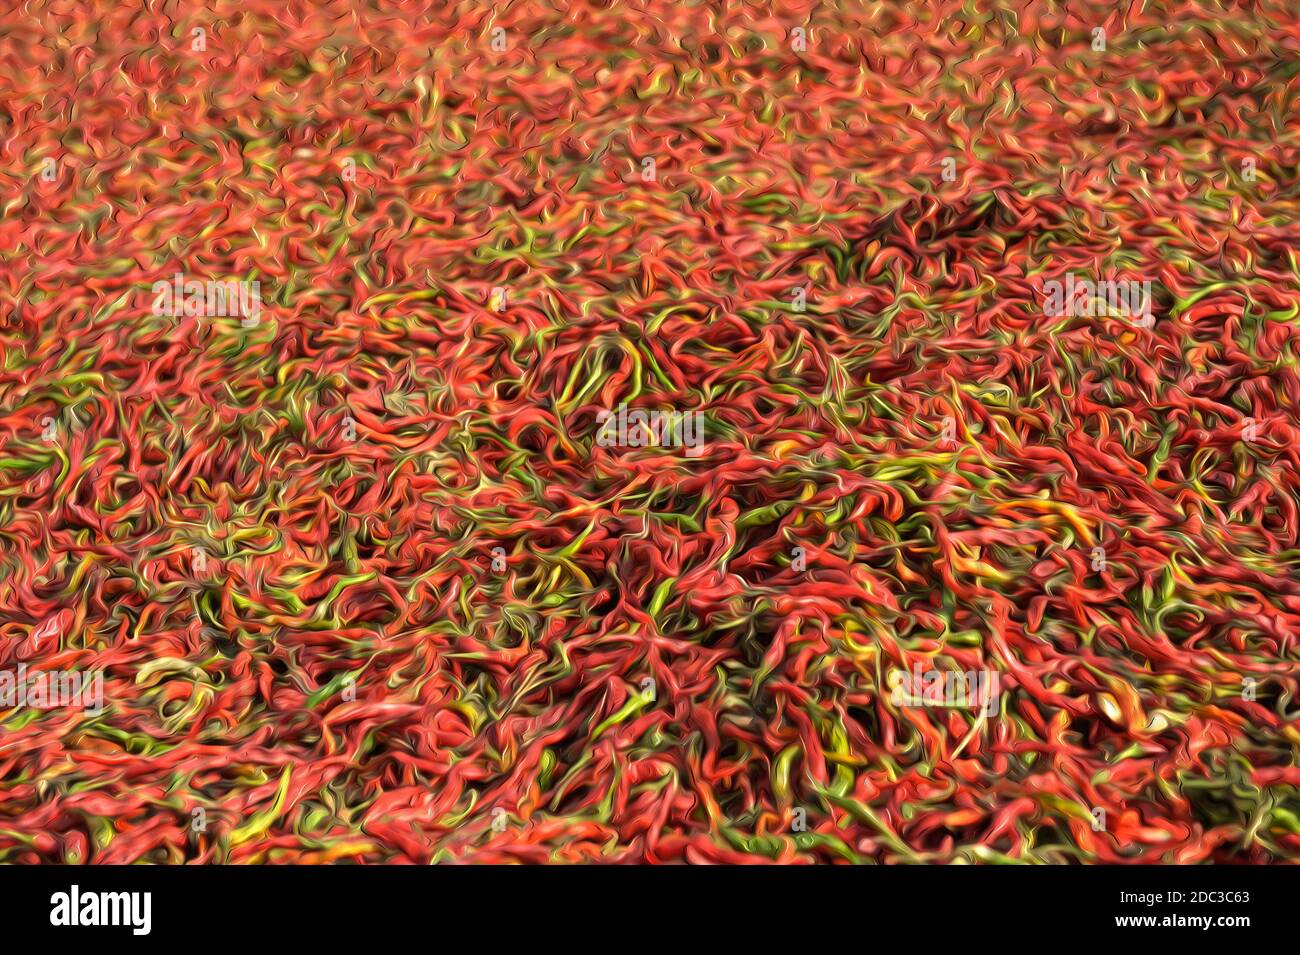 Looking like liquified abstract texture inspirited by a stack of drying red hot chili peppers. Red and green pattern background related to food & ingr Stock Photo